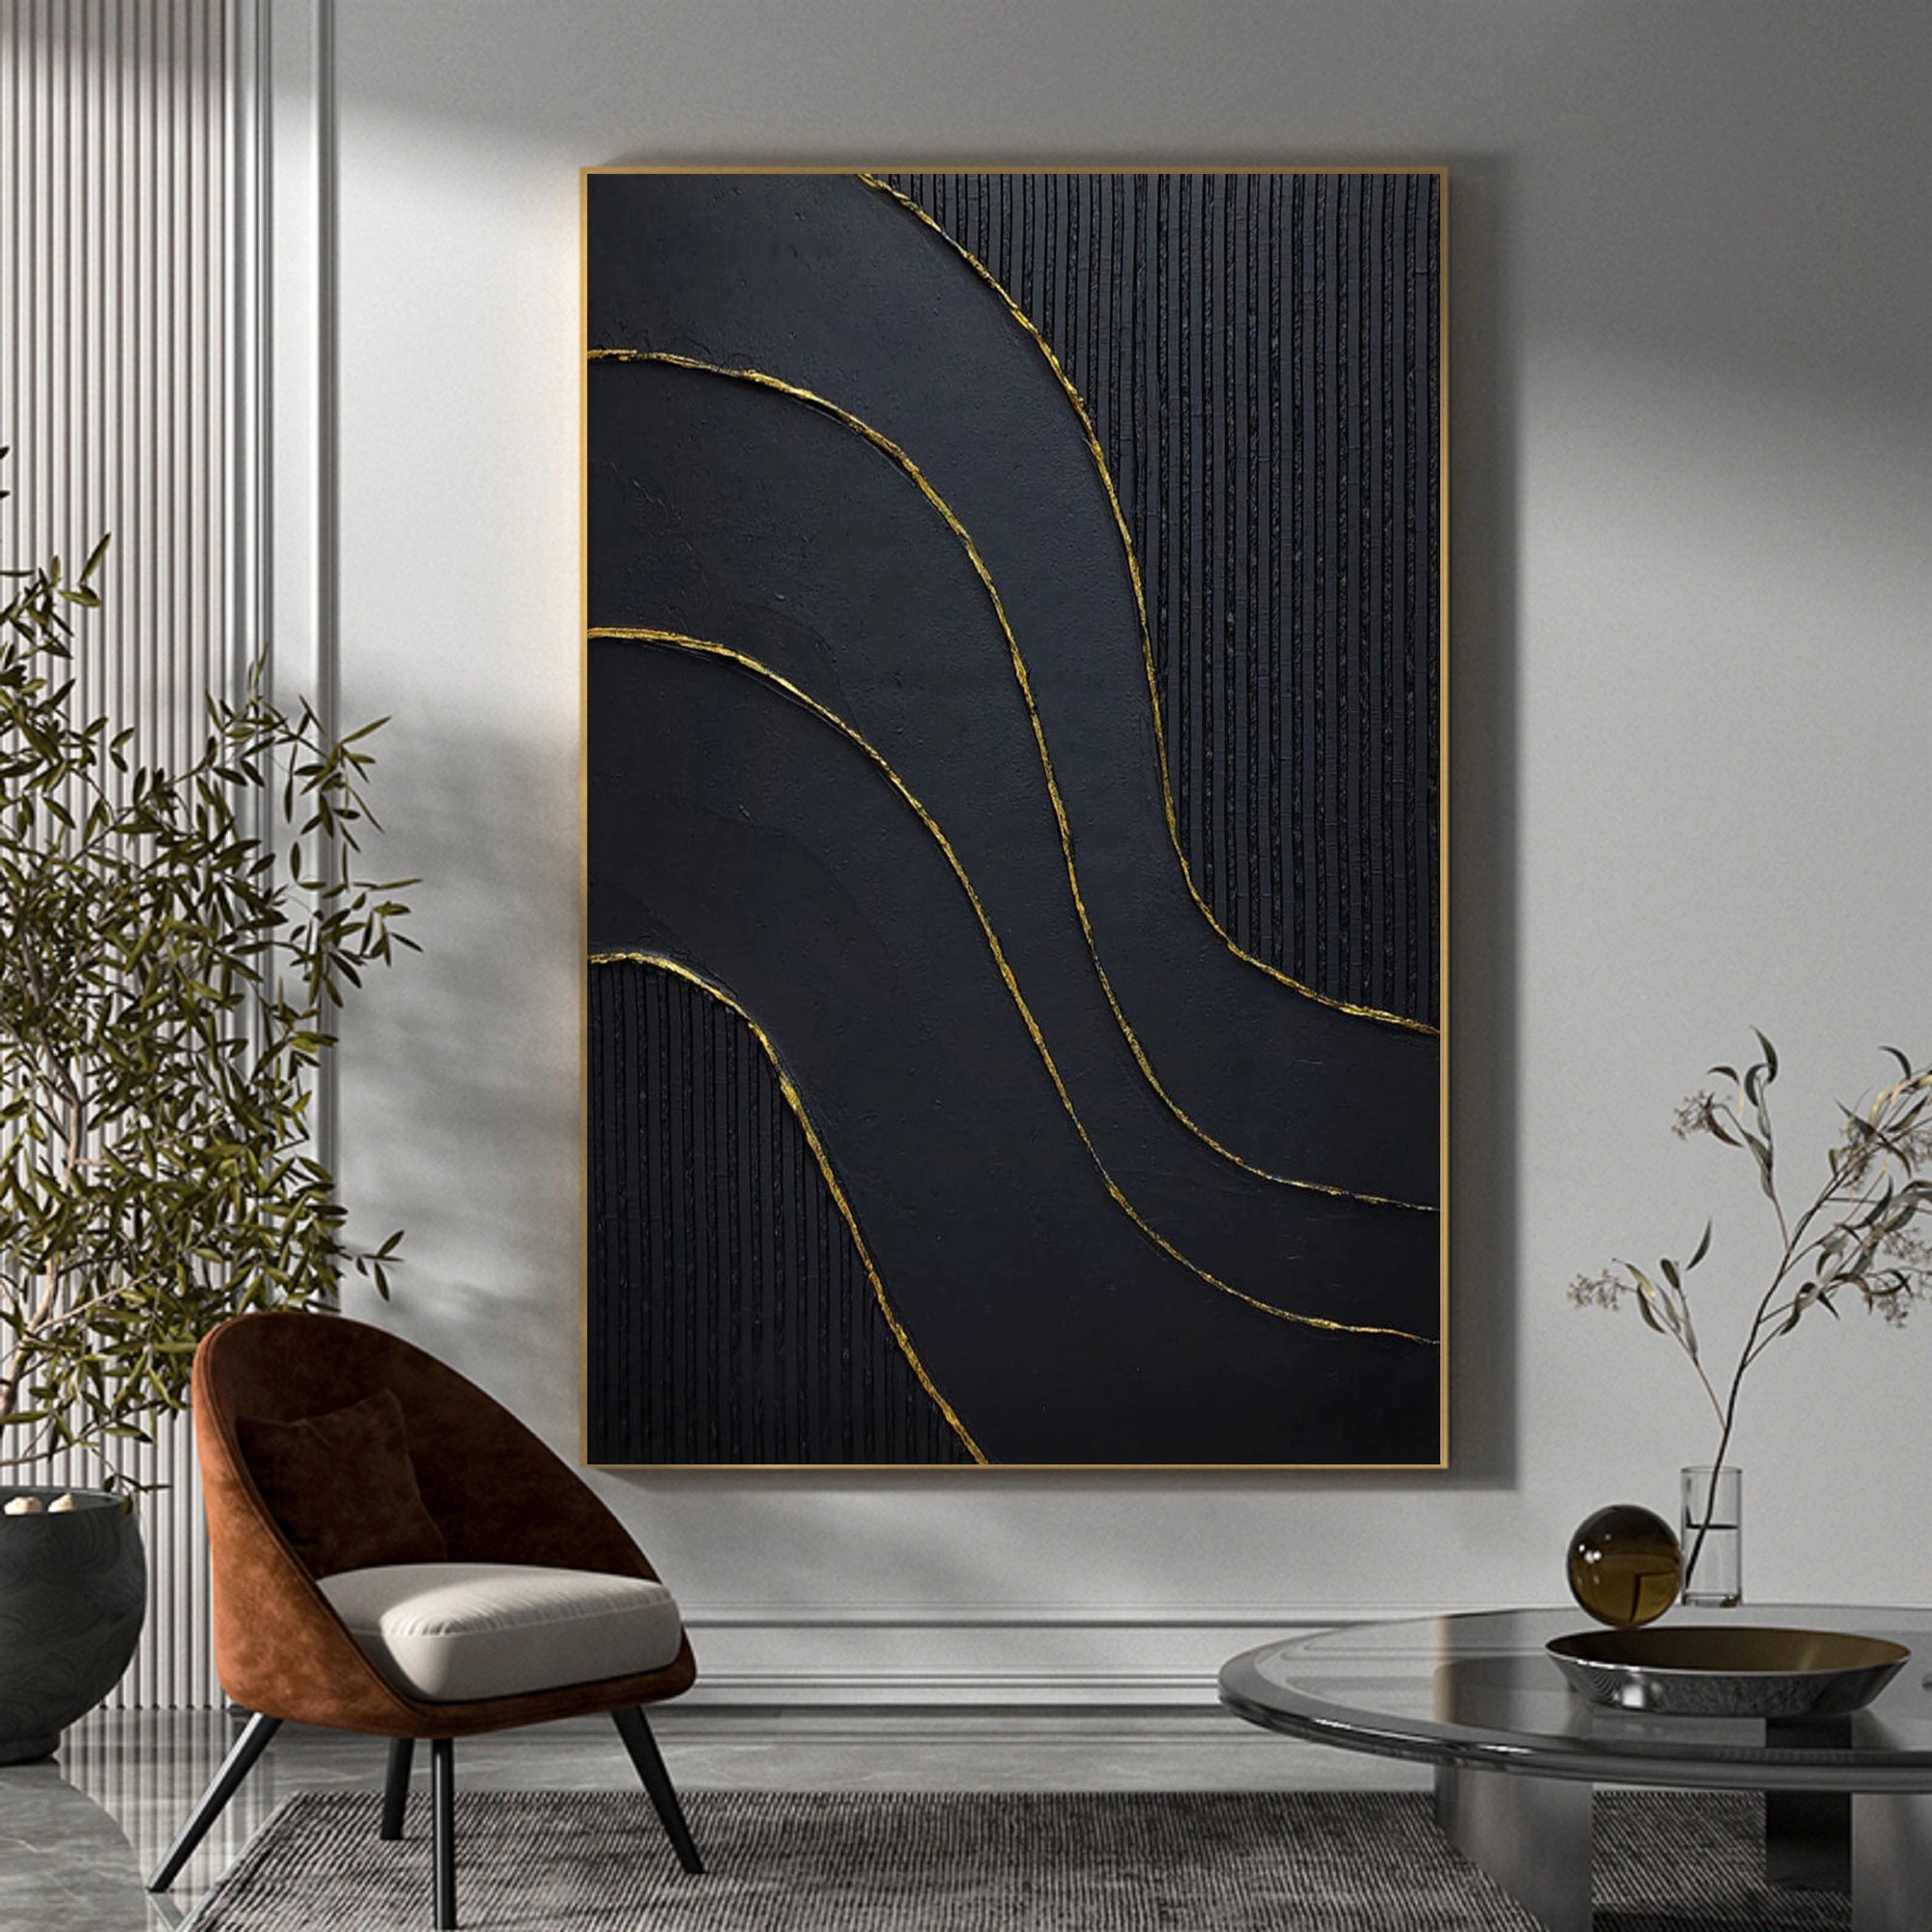 Large 3D Textured Abstract Minimalist Wall Art Black Modernism Painting Gold Foil Handcrafted Artwork Home Decor